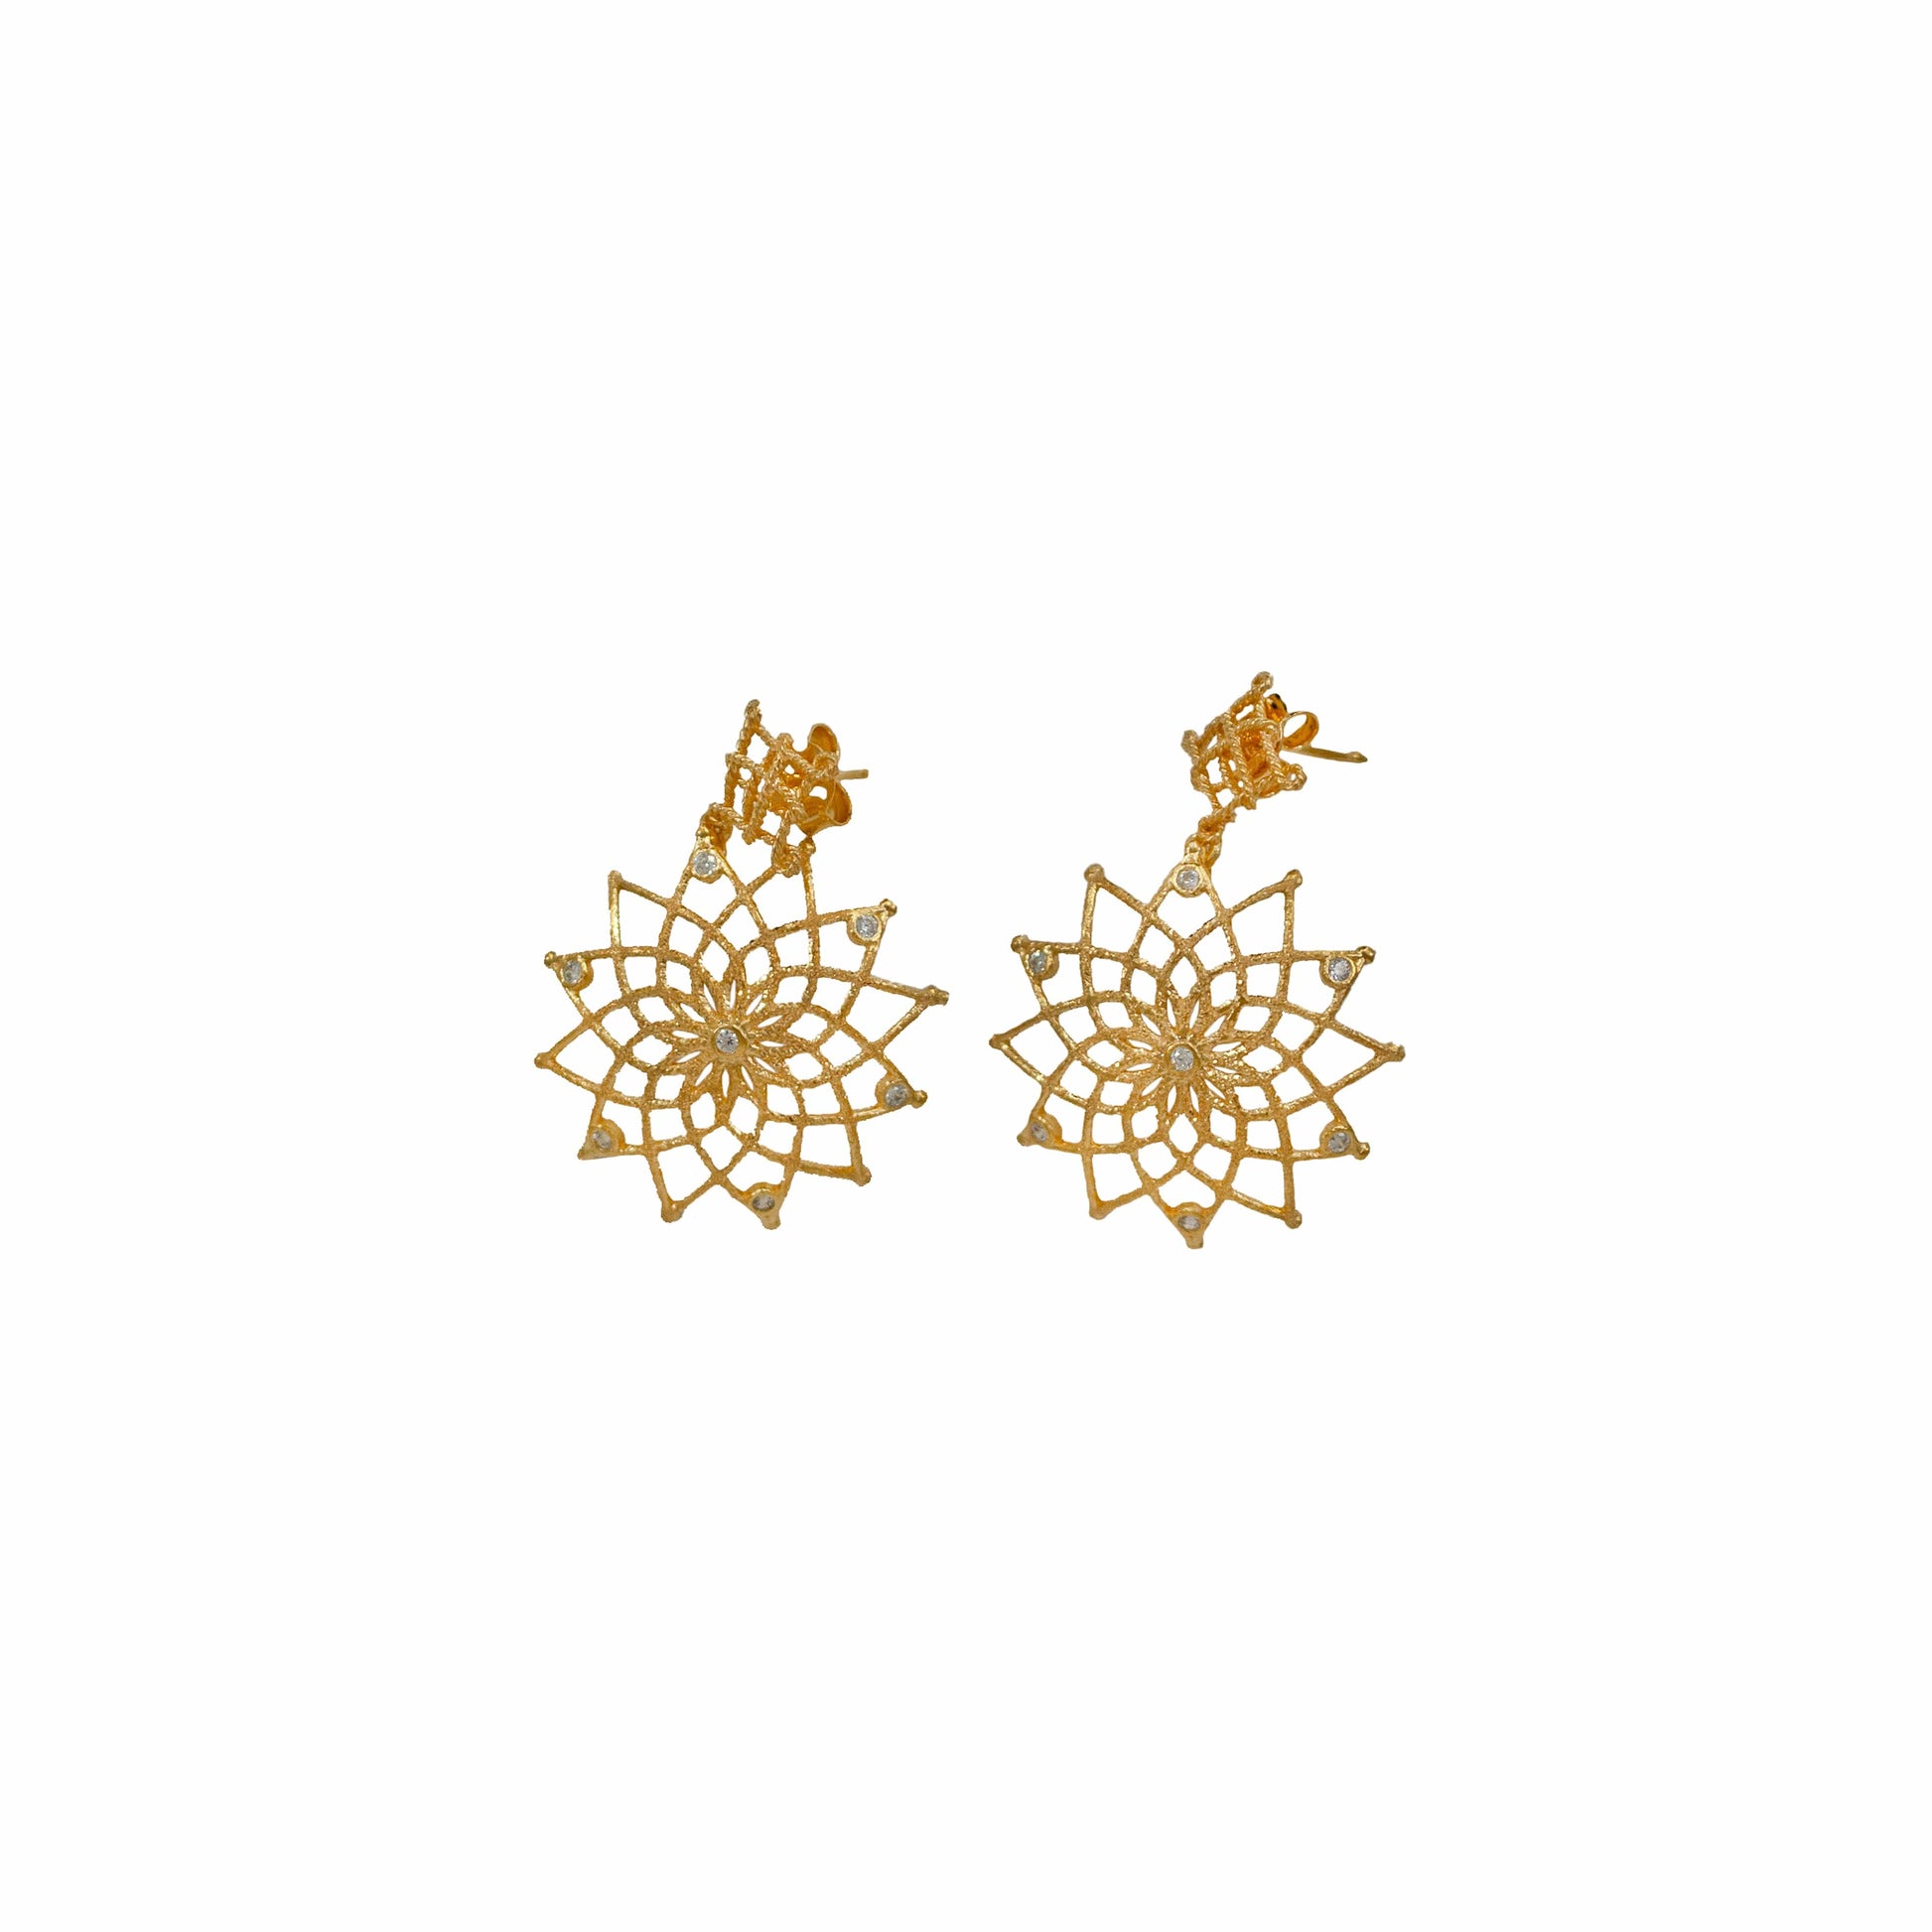 MONDO CATTOLICO 28 mm Gold Plated Caput Mundi Earrings White Crystals